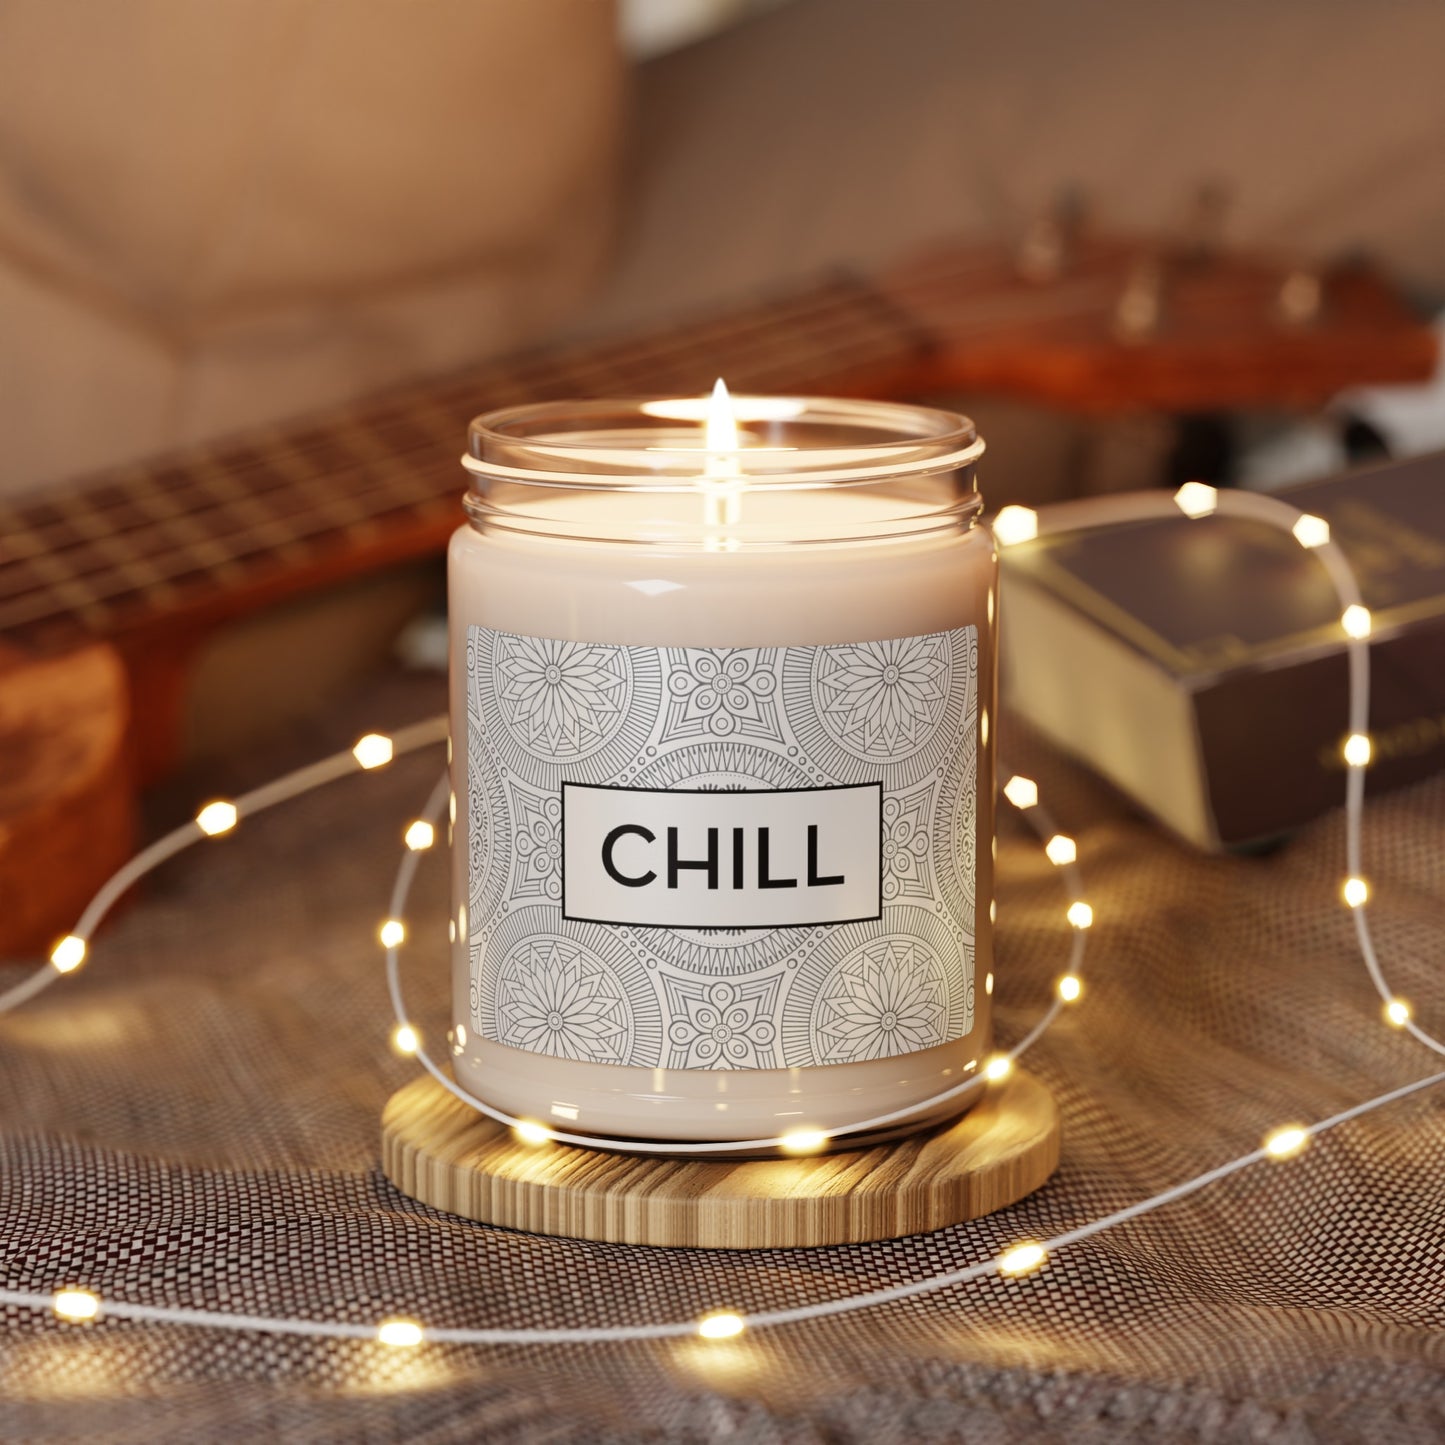 CHILL Vegan Soy Scented Candle, 9oz